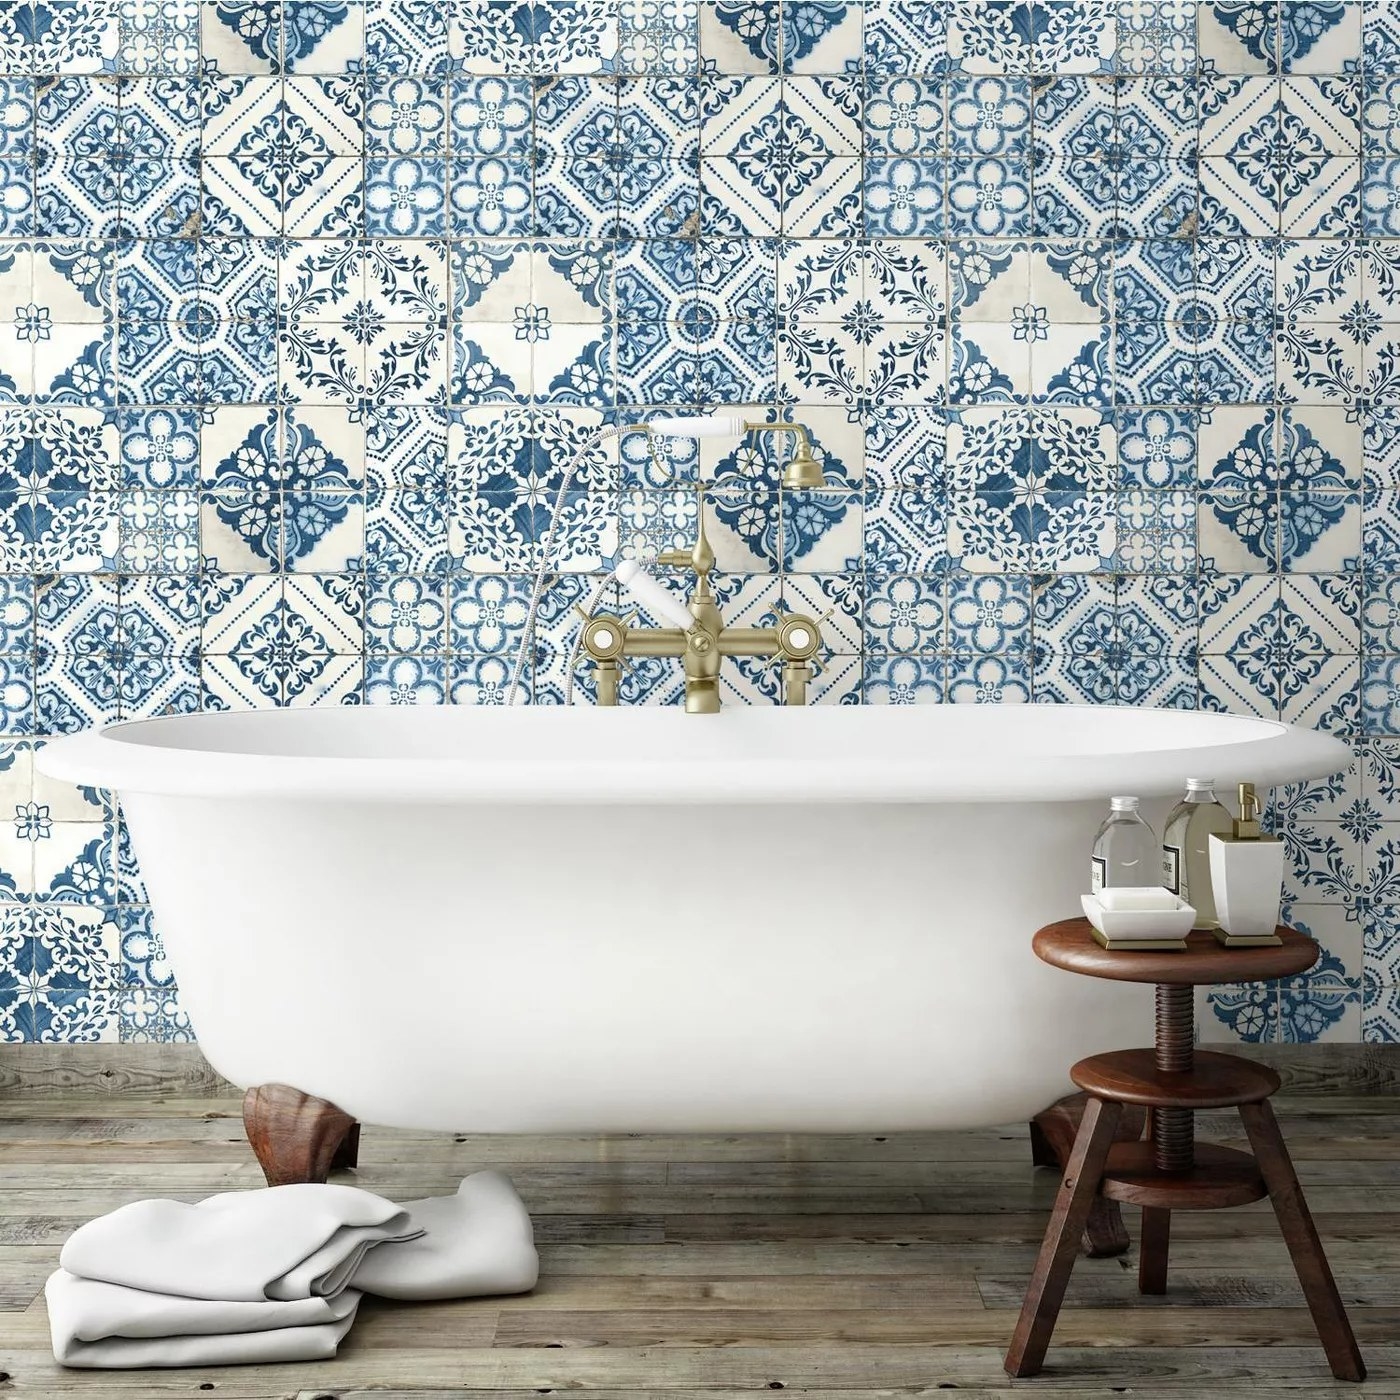 The blue and white wallpaper in a bathroom